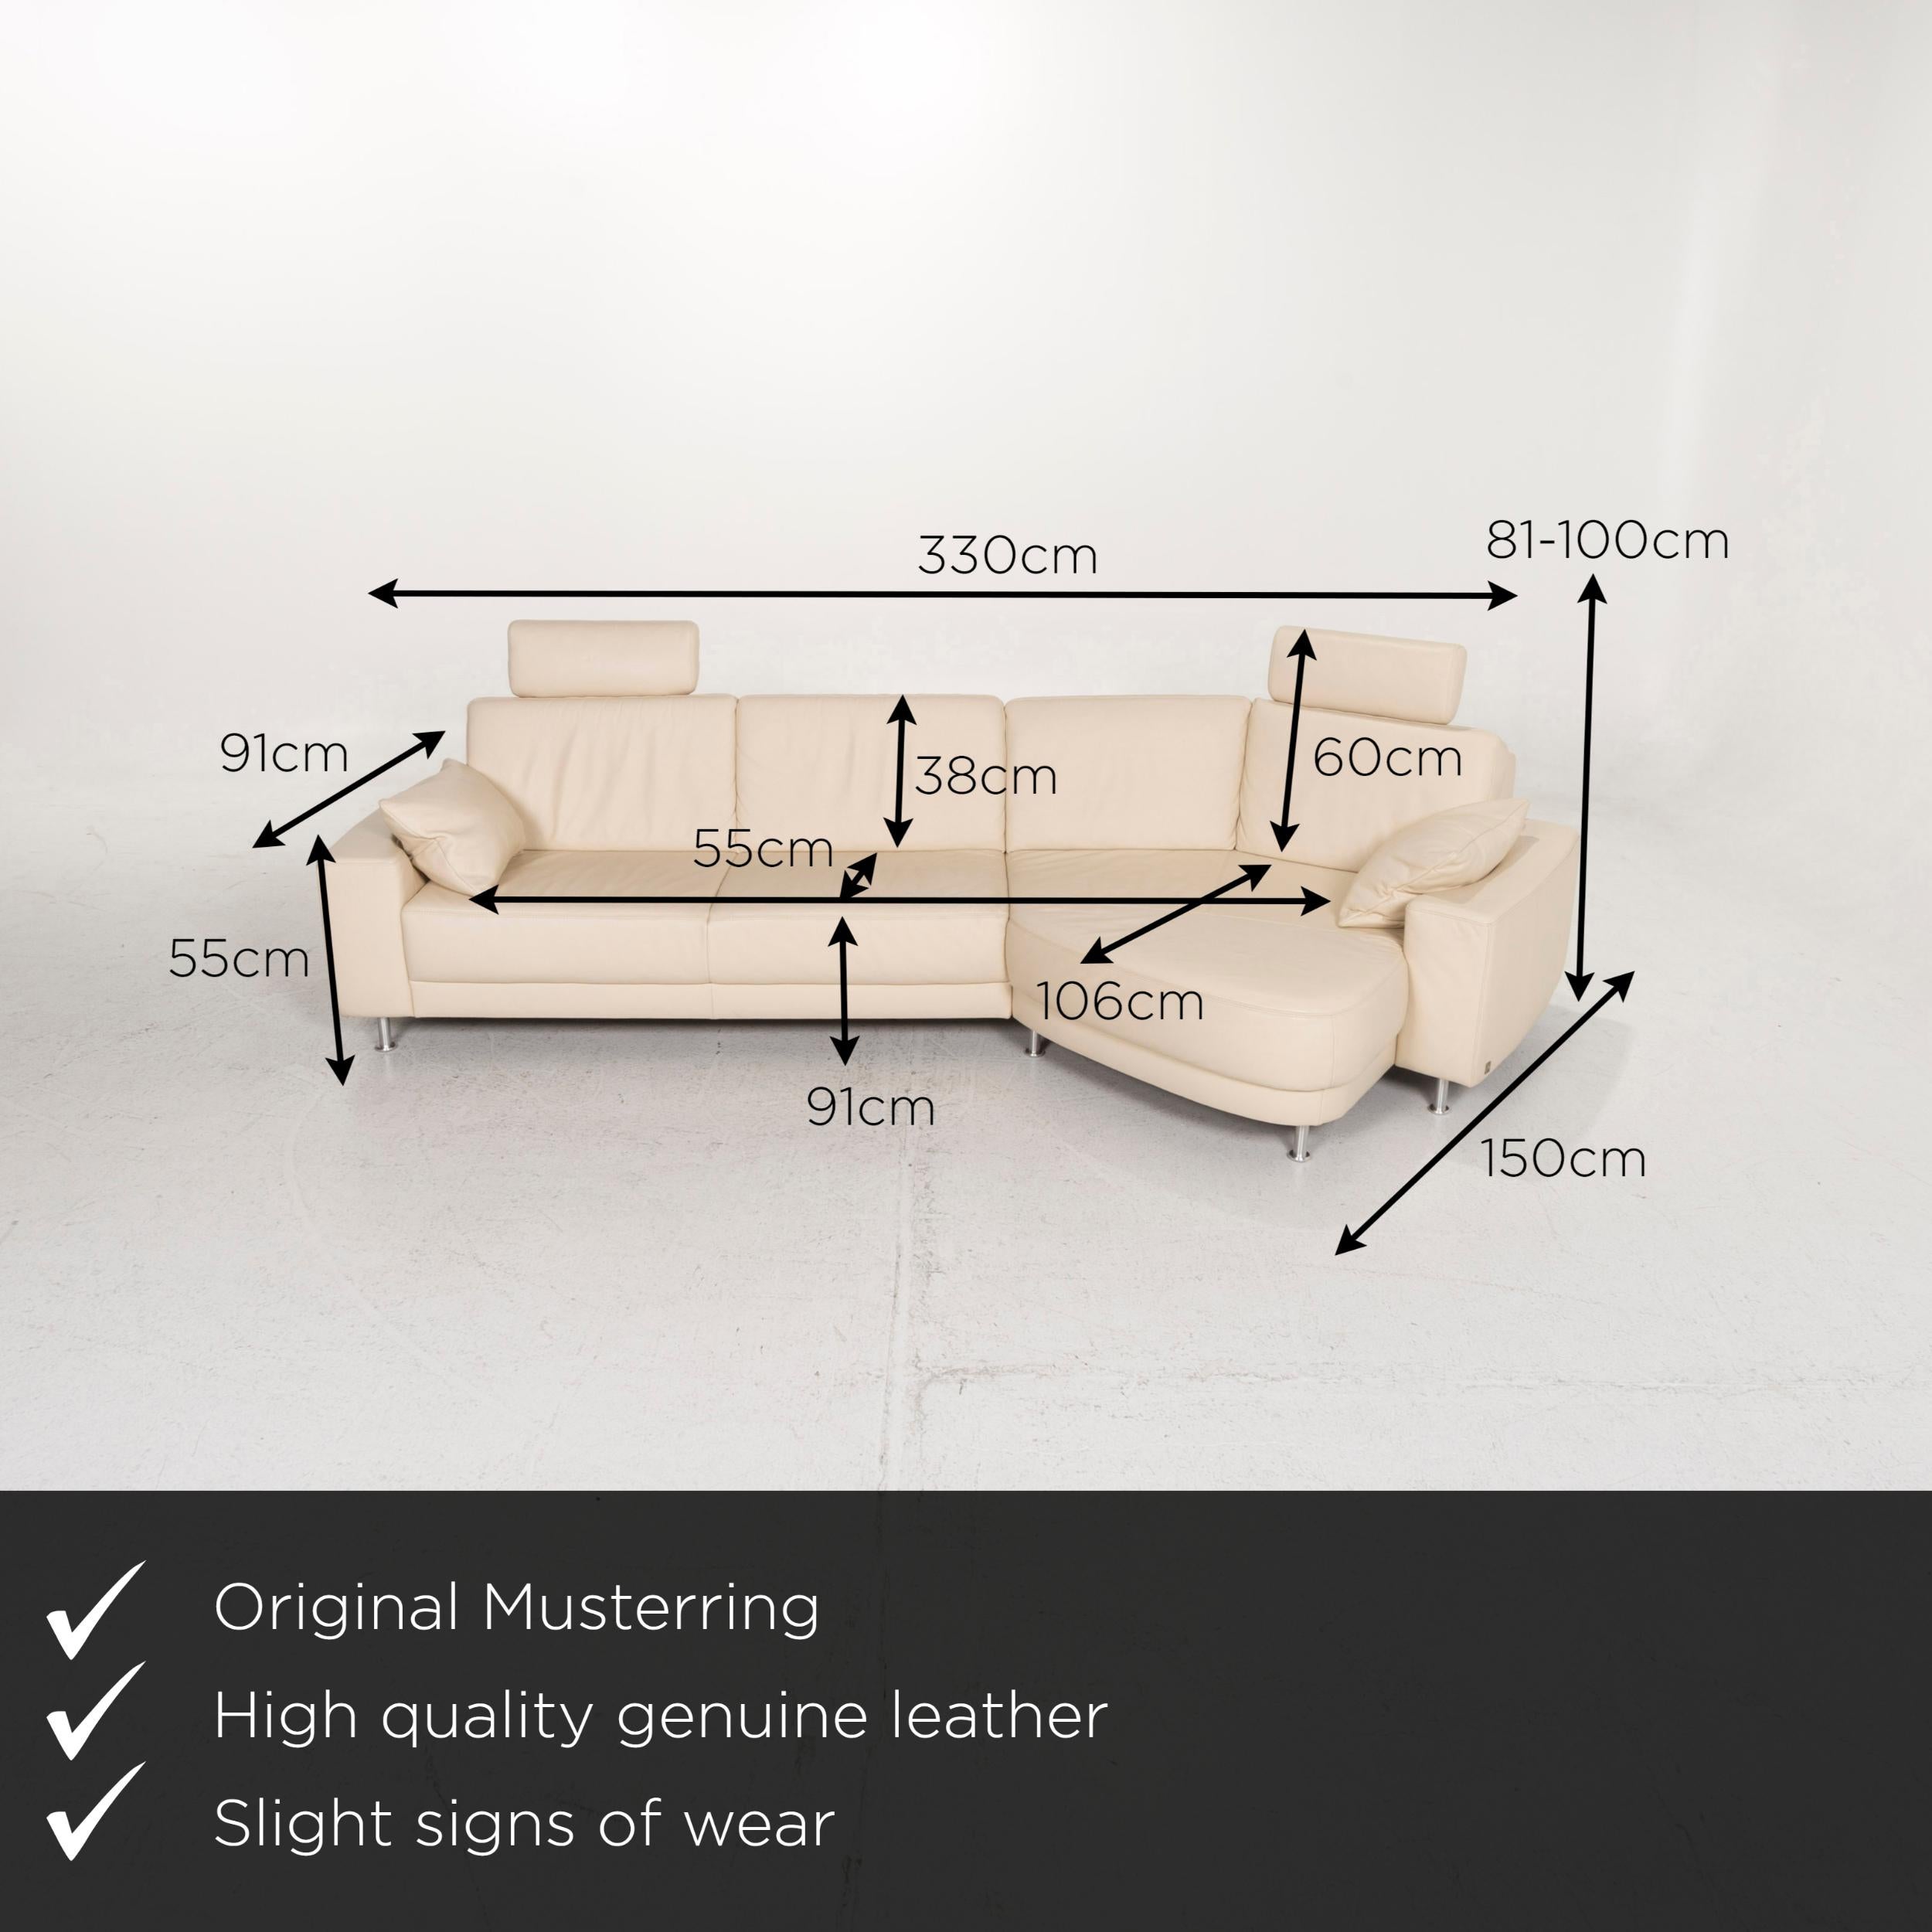 We present to you a sample ring leather sofa cream corner sofa.

 

 Product measurements in centimeters:
 

Depth 91
Width 330
Height 81
Seat height 42
Rest height 55
Seat depth 55
Seat width 227
Back height 38.
 